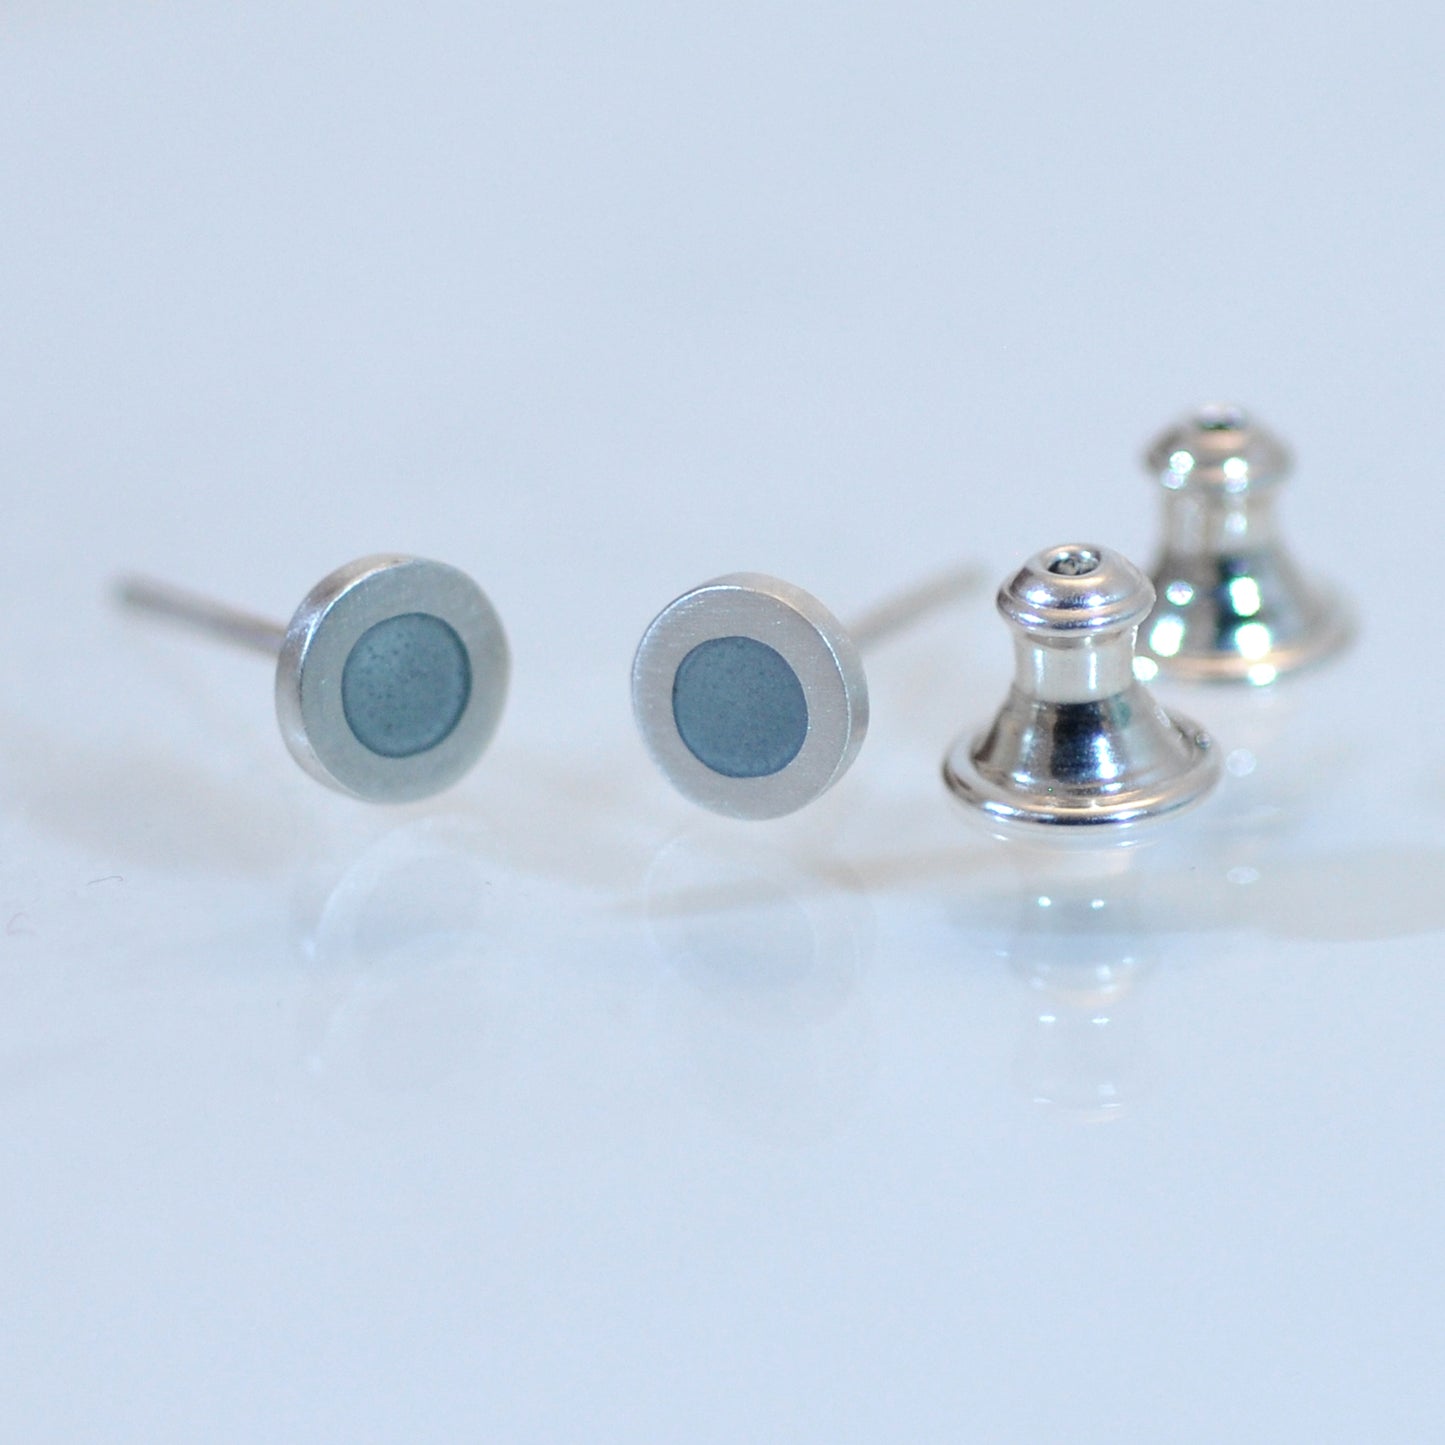 Tiny Round silver and enamel ear studs, this colour mouse grey